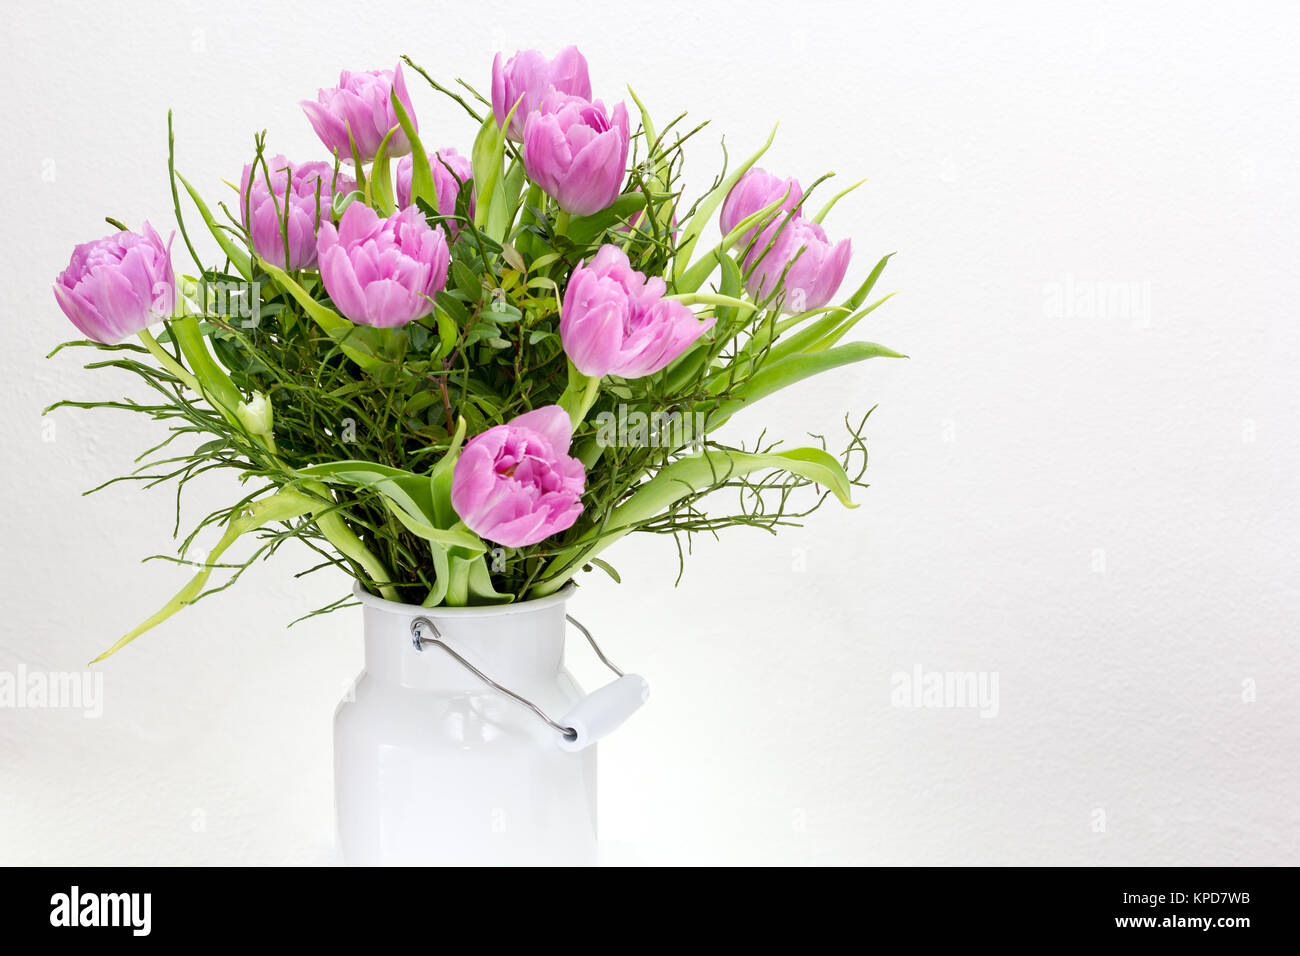 pink,violet tulips in a white milk jug against a white background Stock Photo